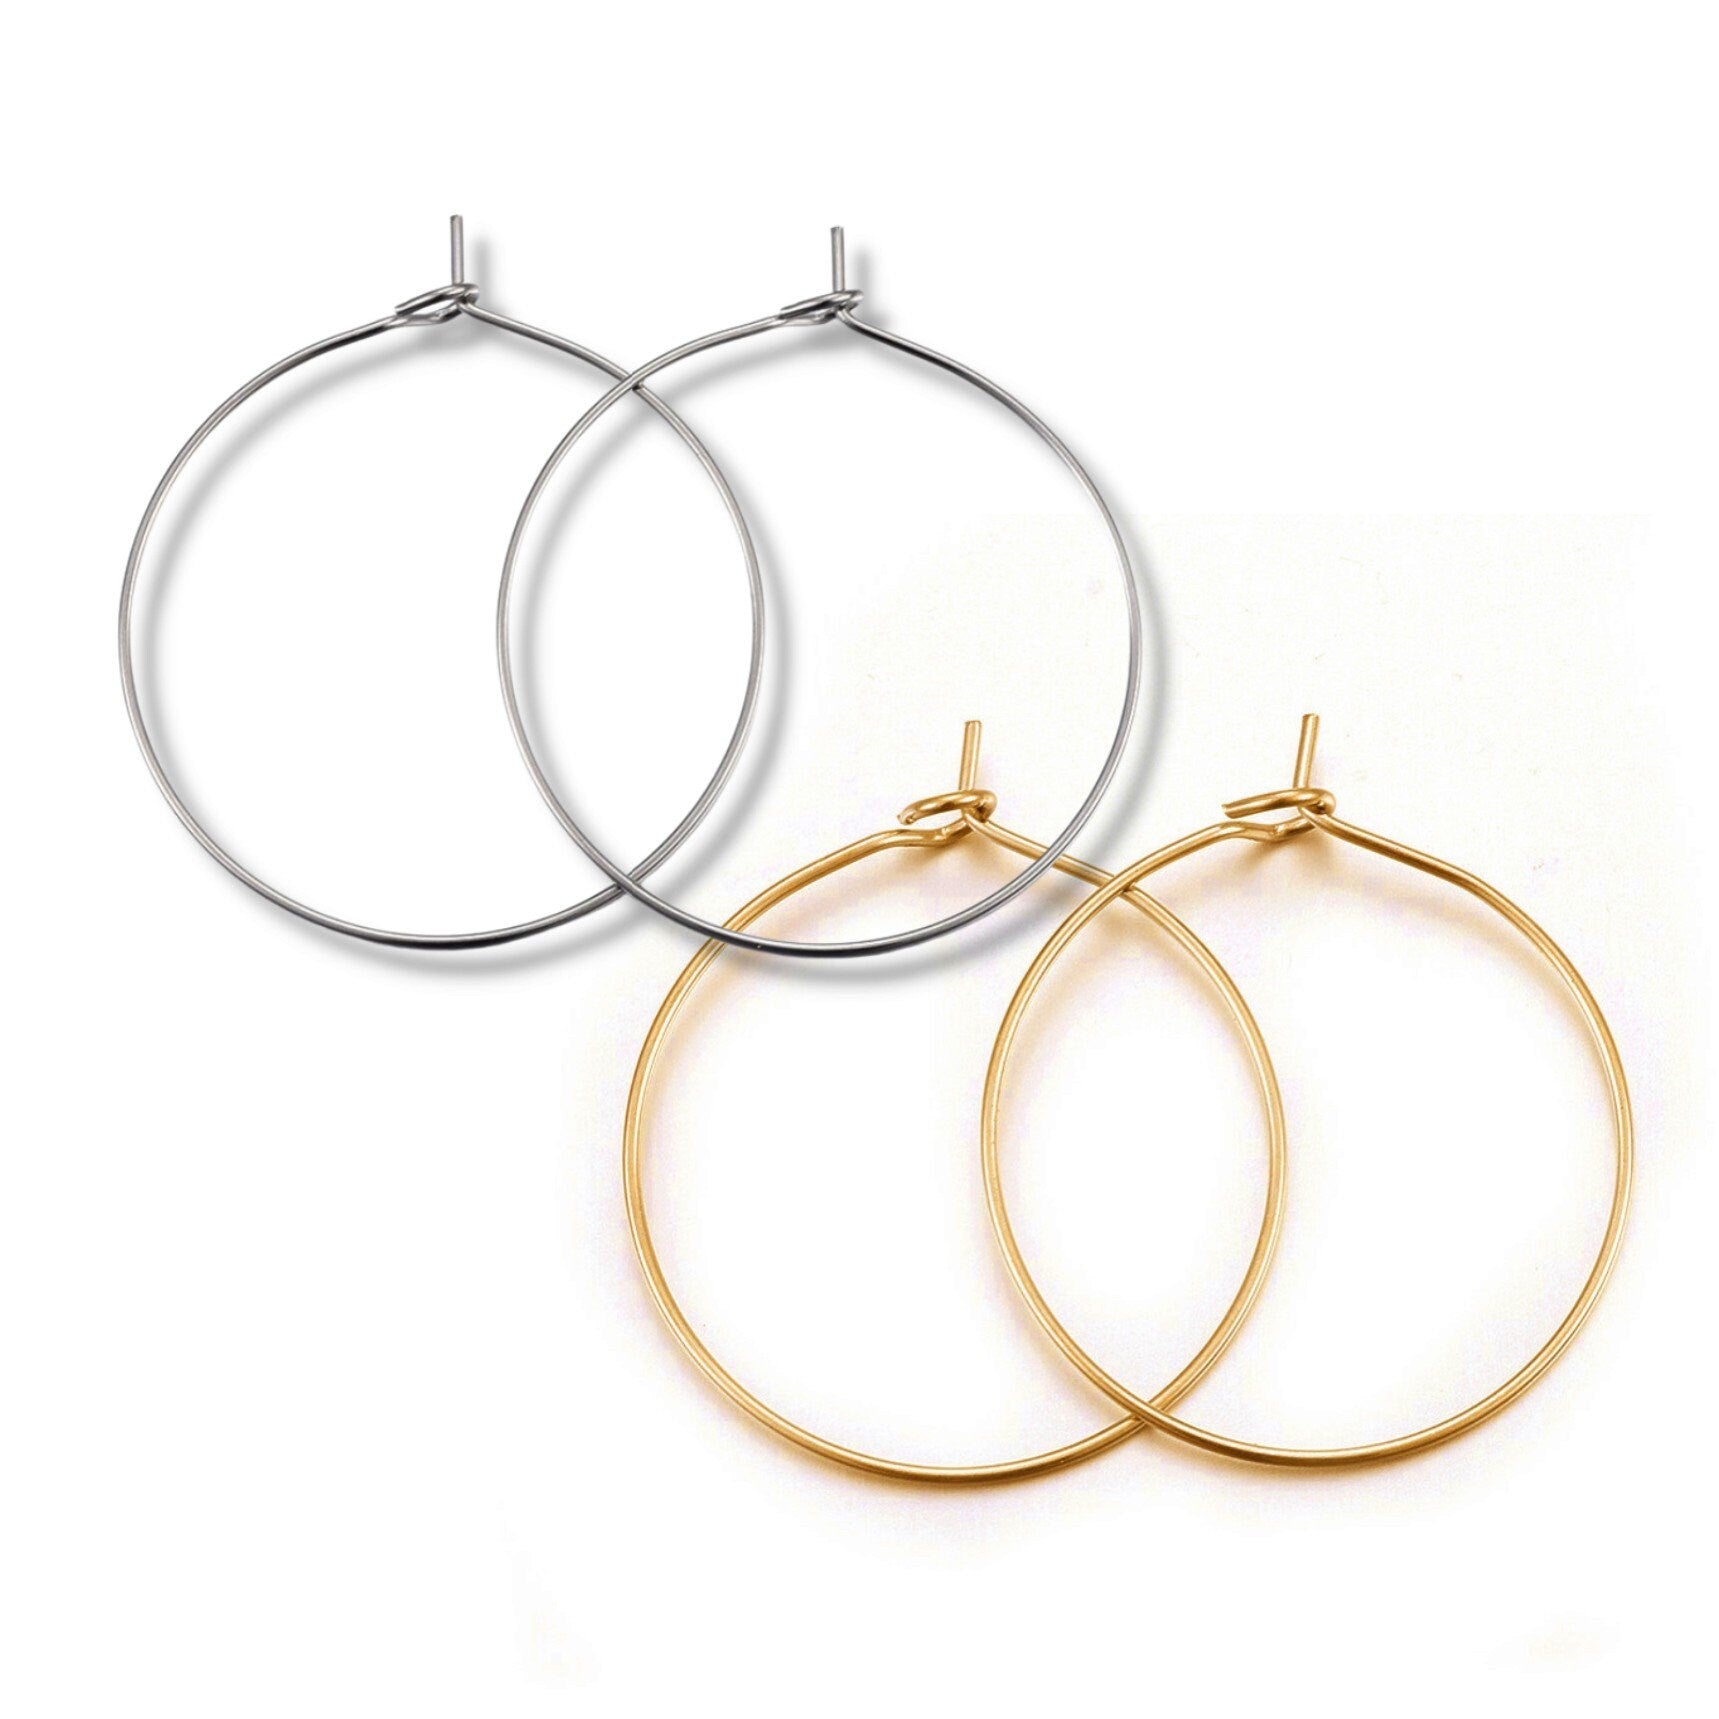 Surgical stainless steel hoops, Earring findings for jewelry making